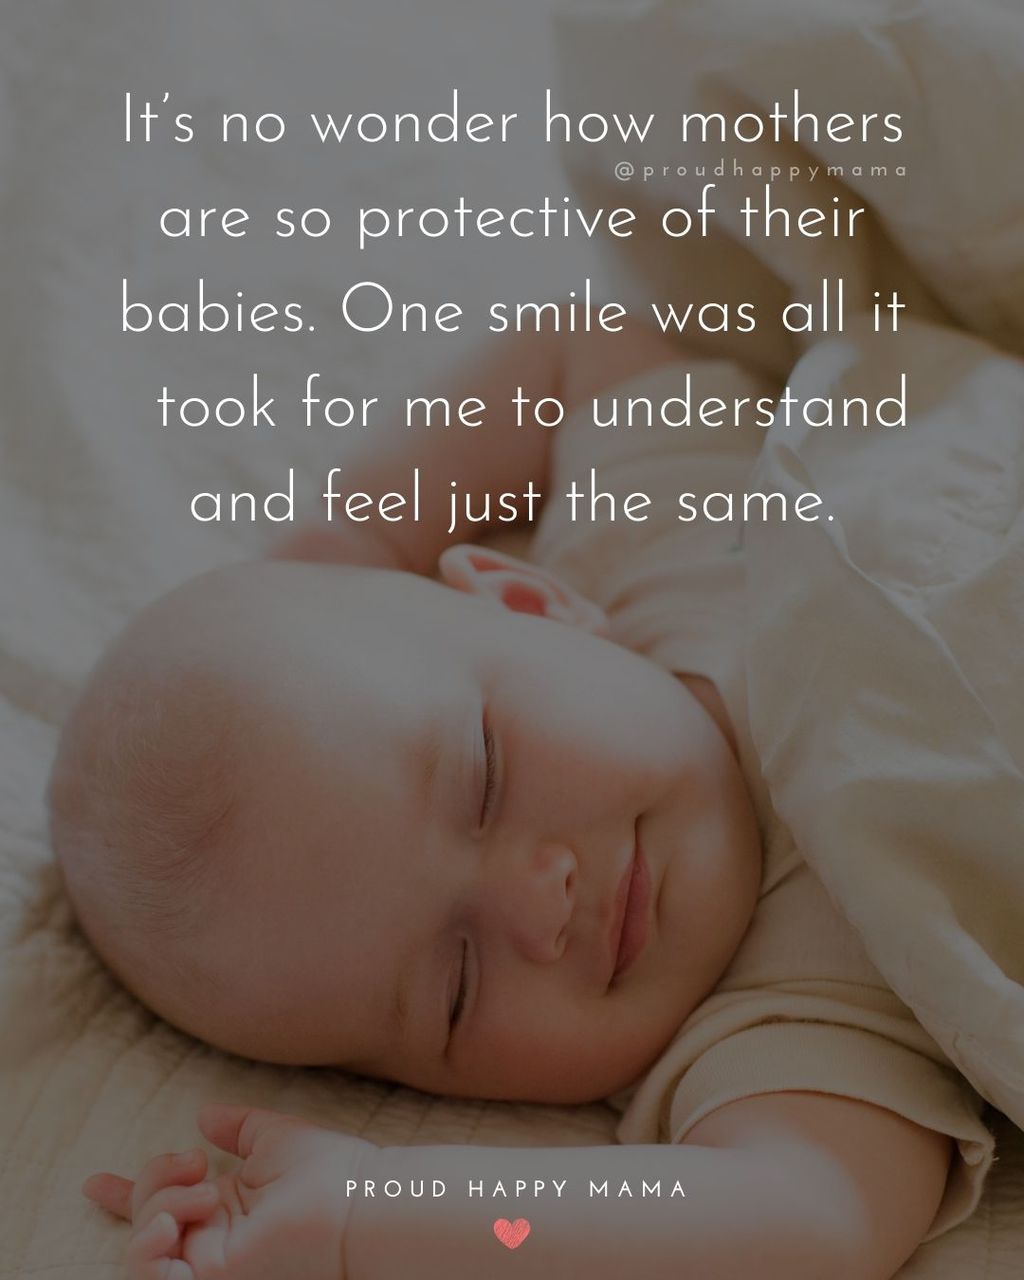 50+ Cute Baby Smile Quotes To Melt Your Heart